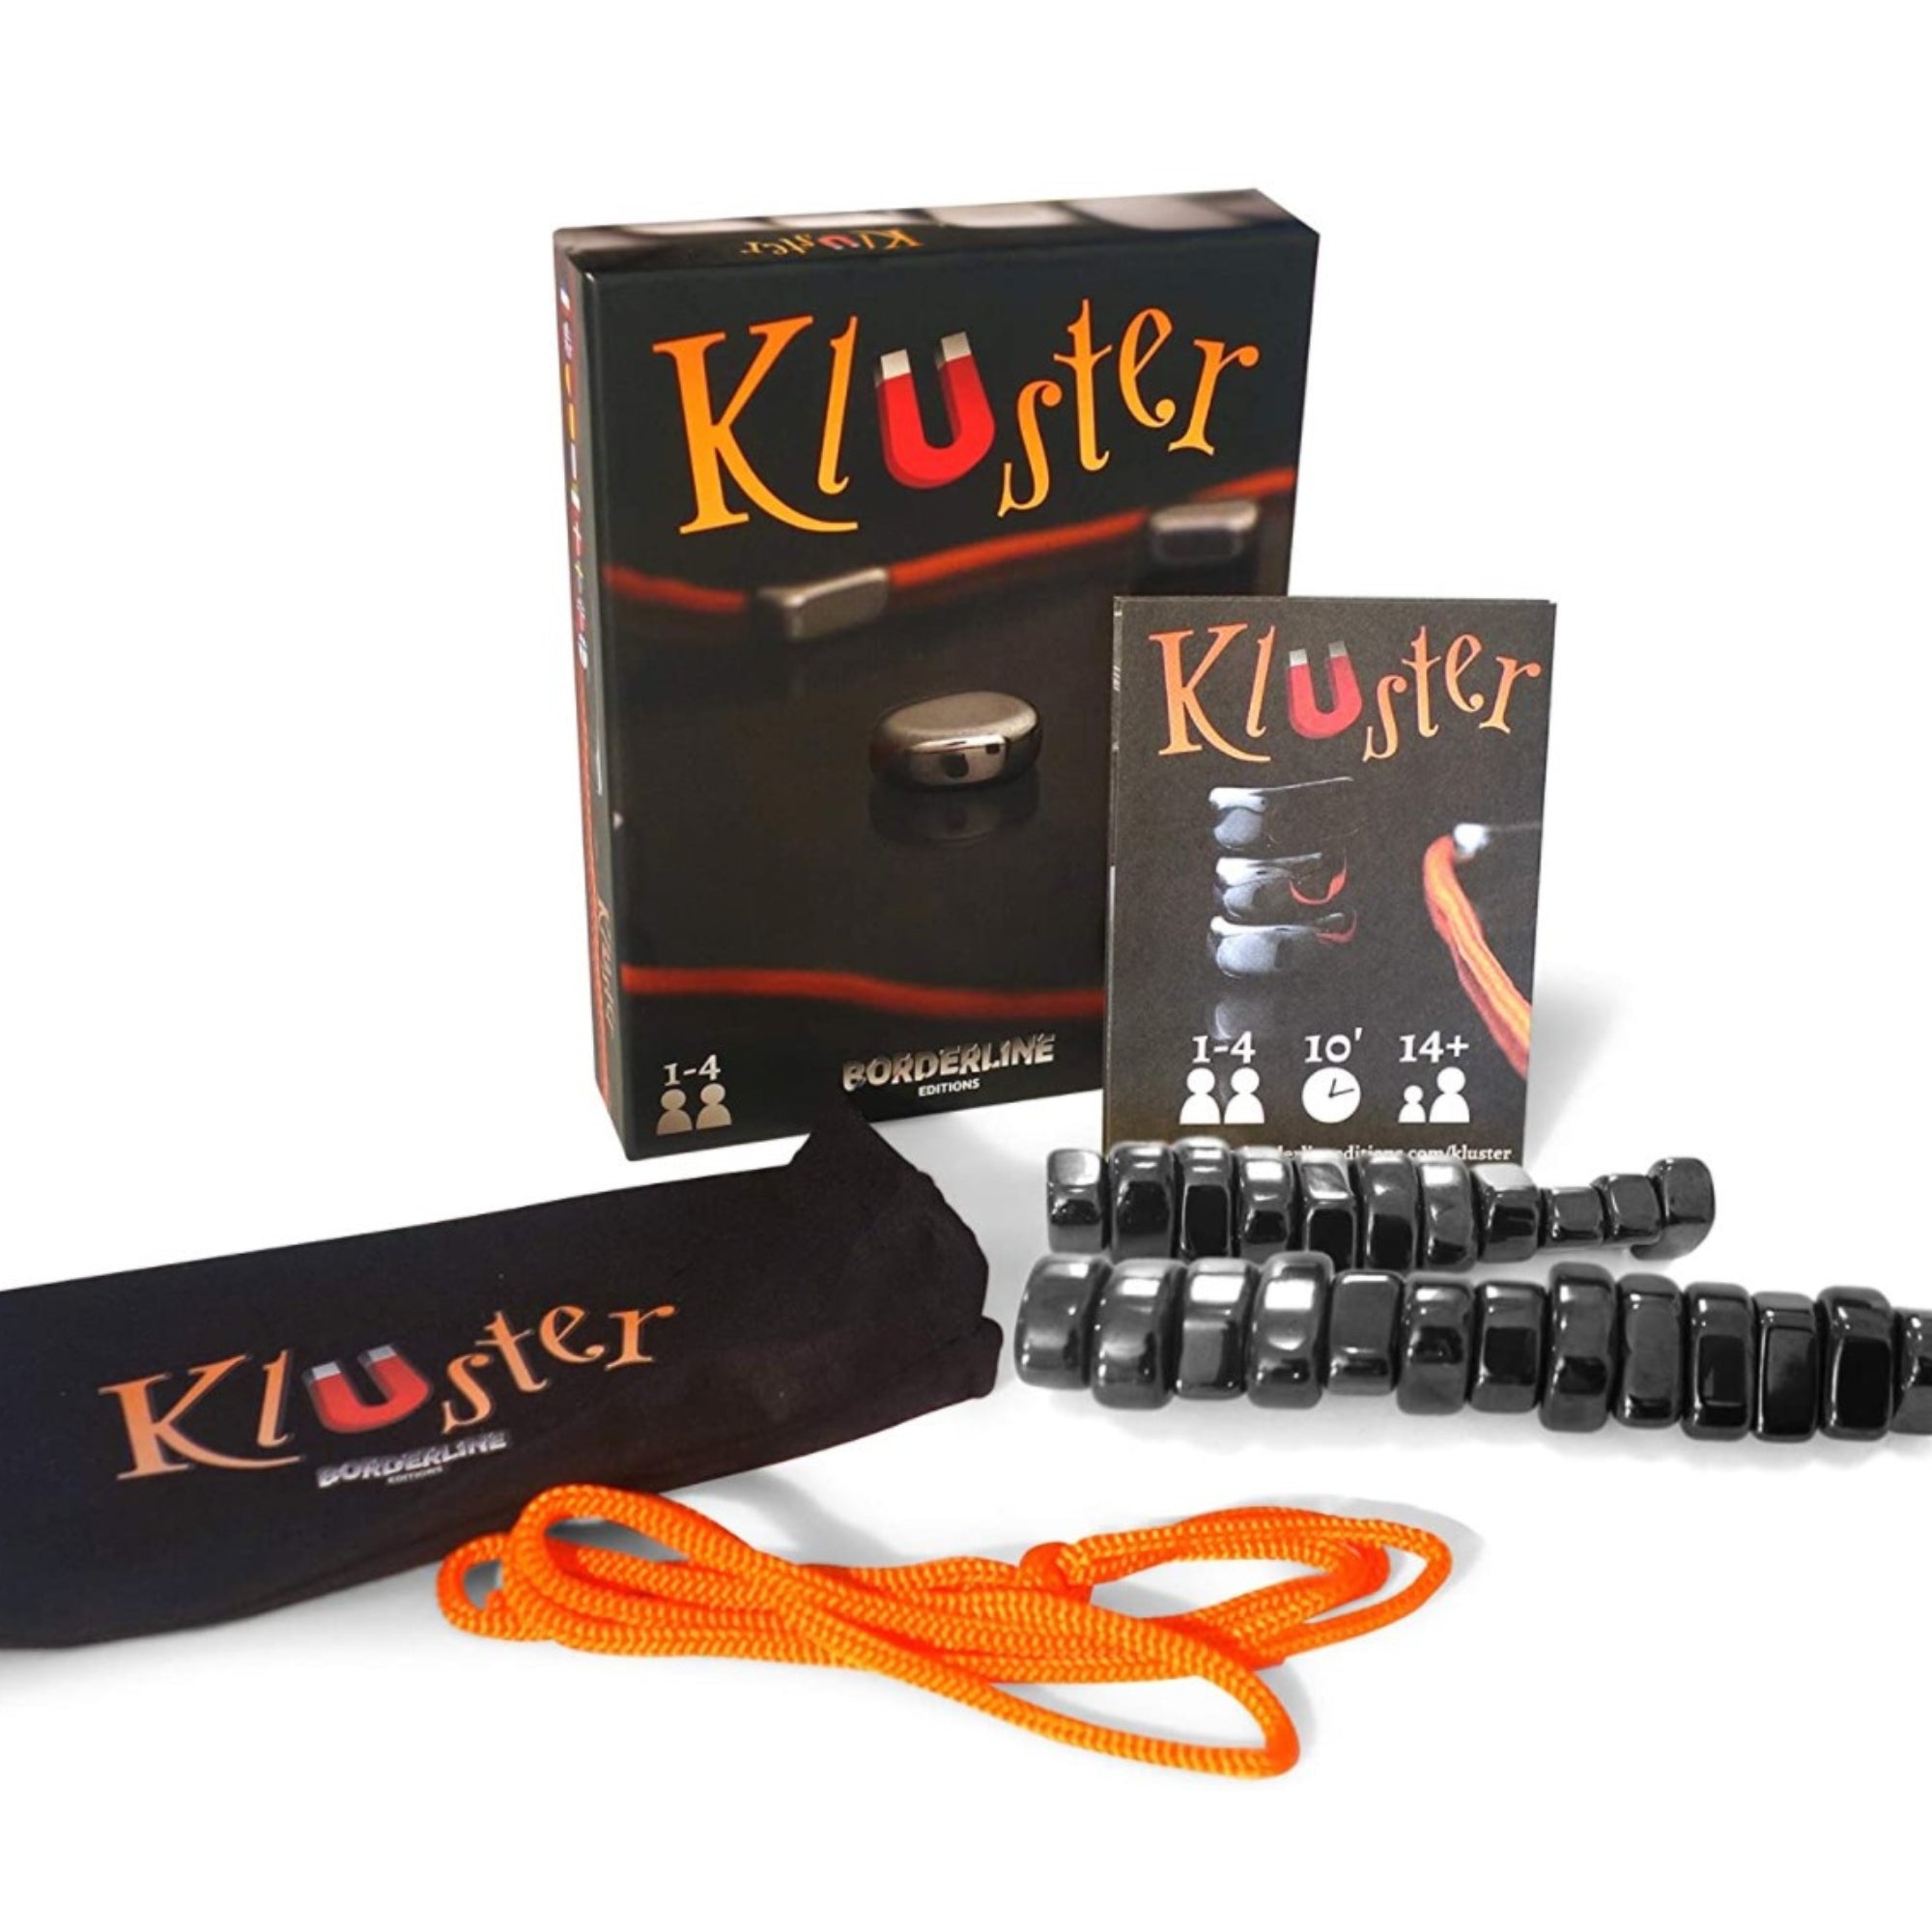 kluster box and contents